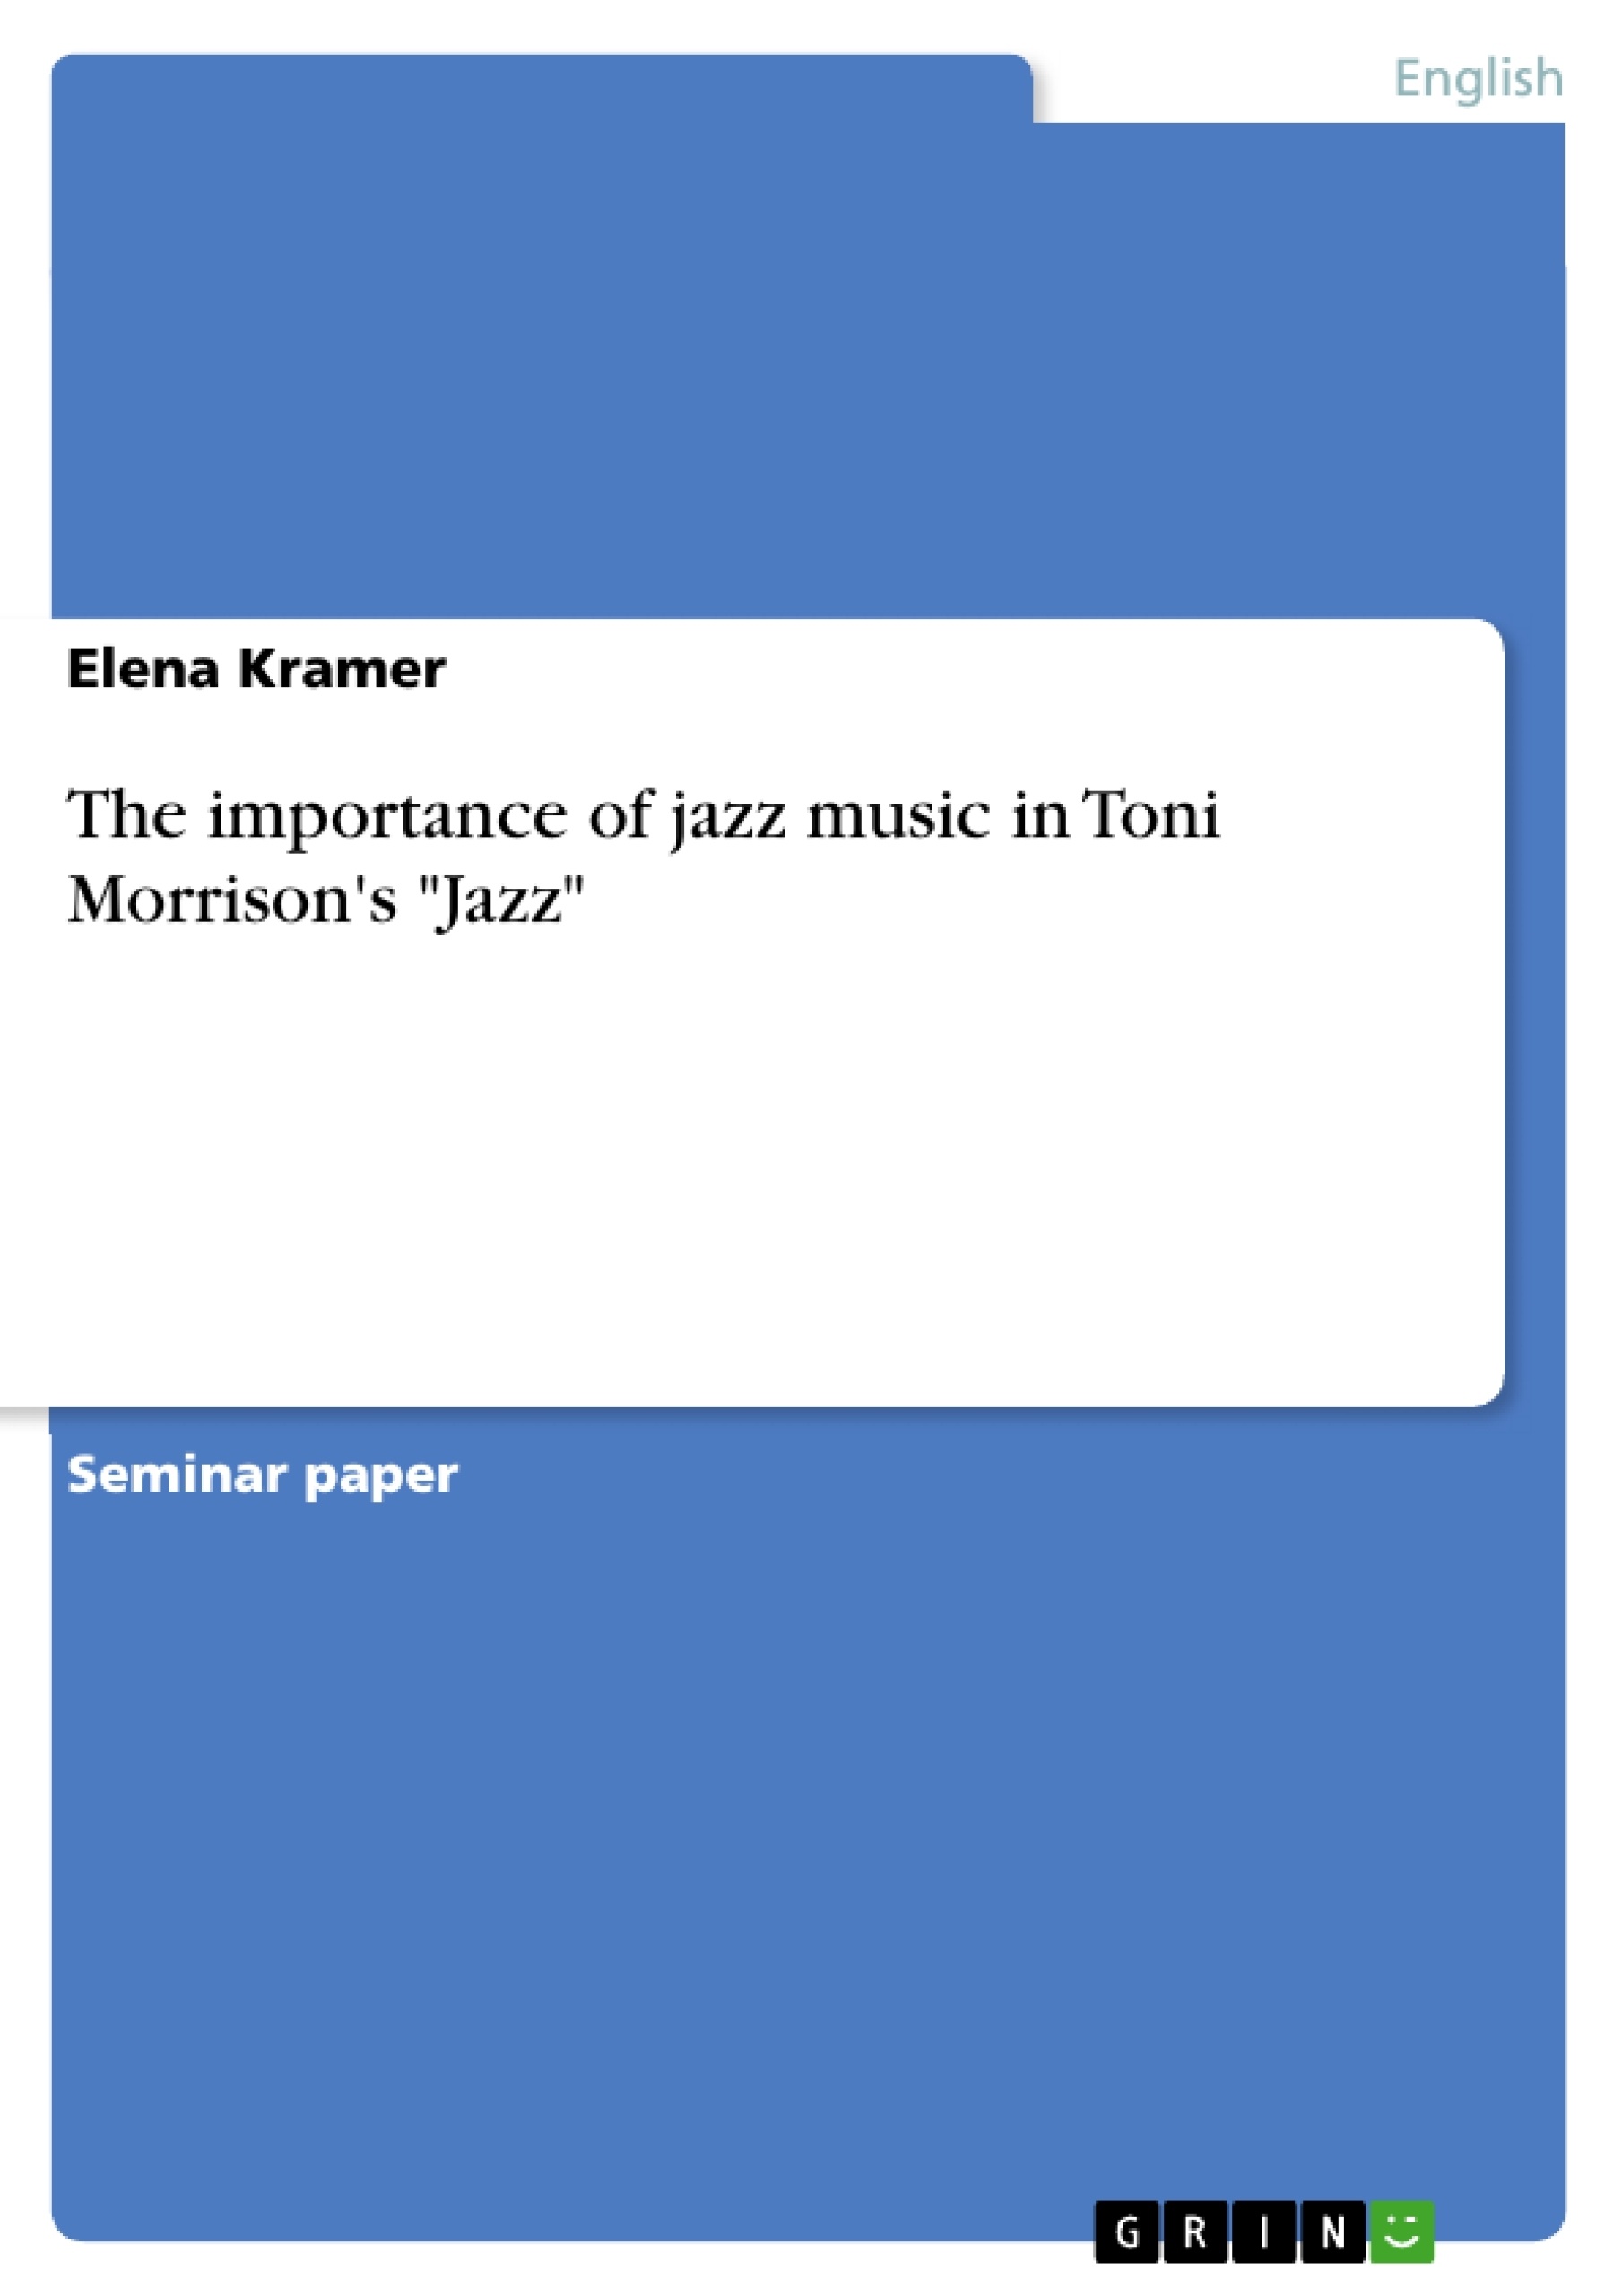 Title: The importance of jazz music in Toni Morrison's "Jazz"